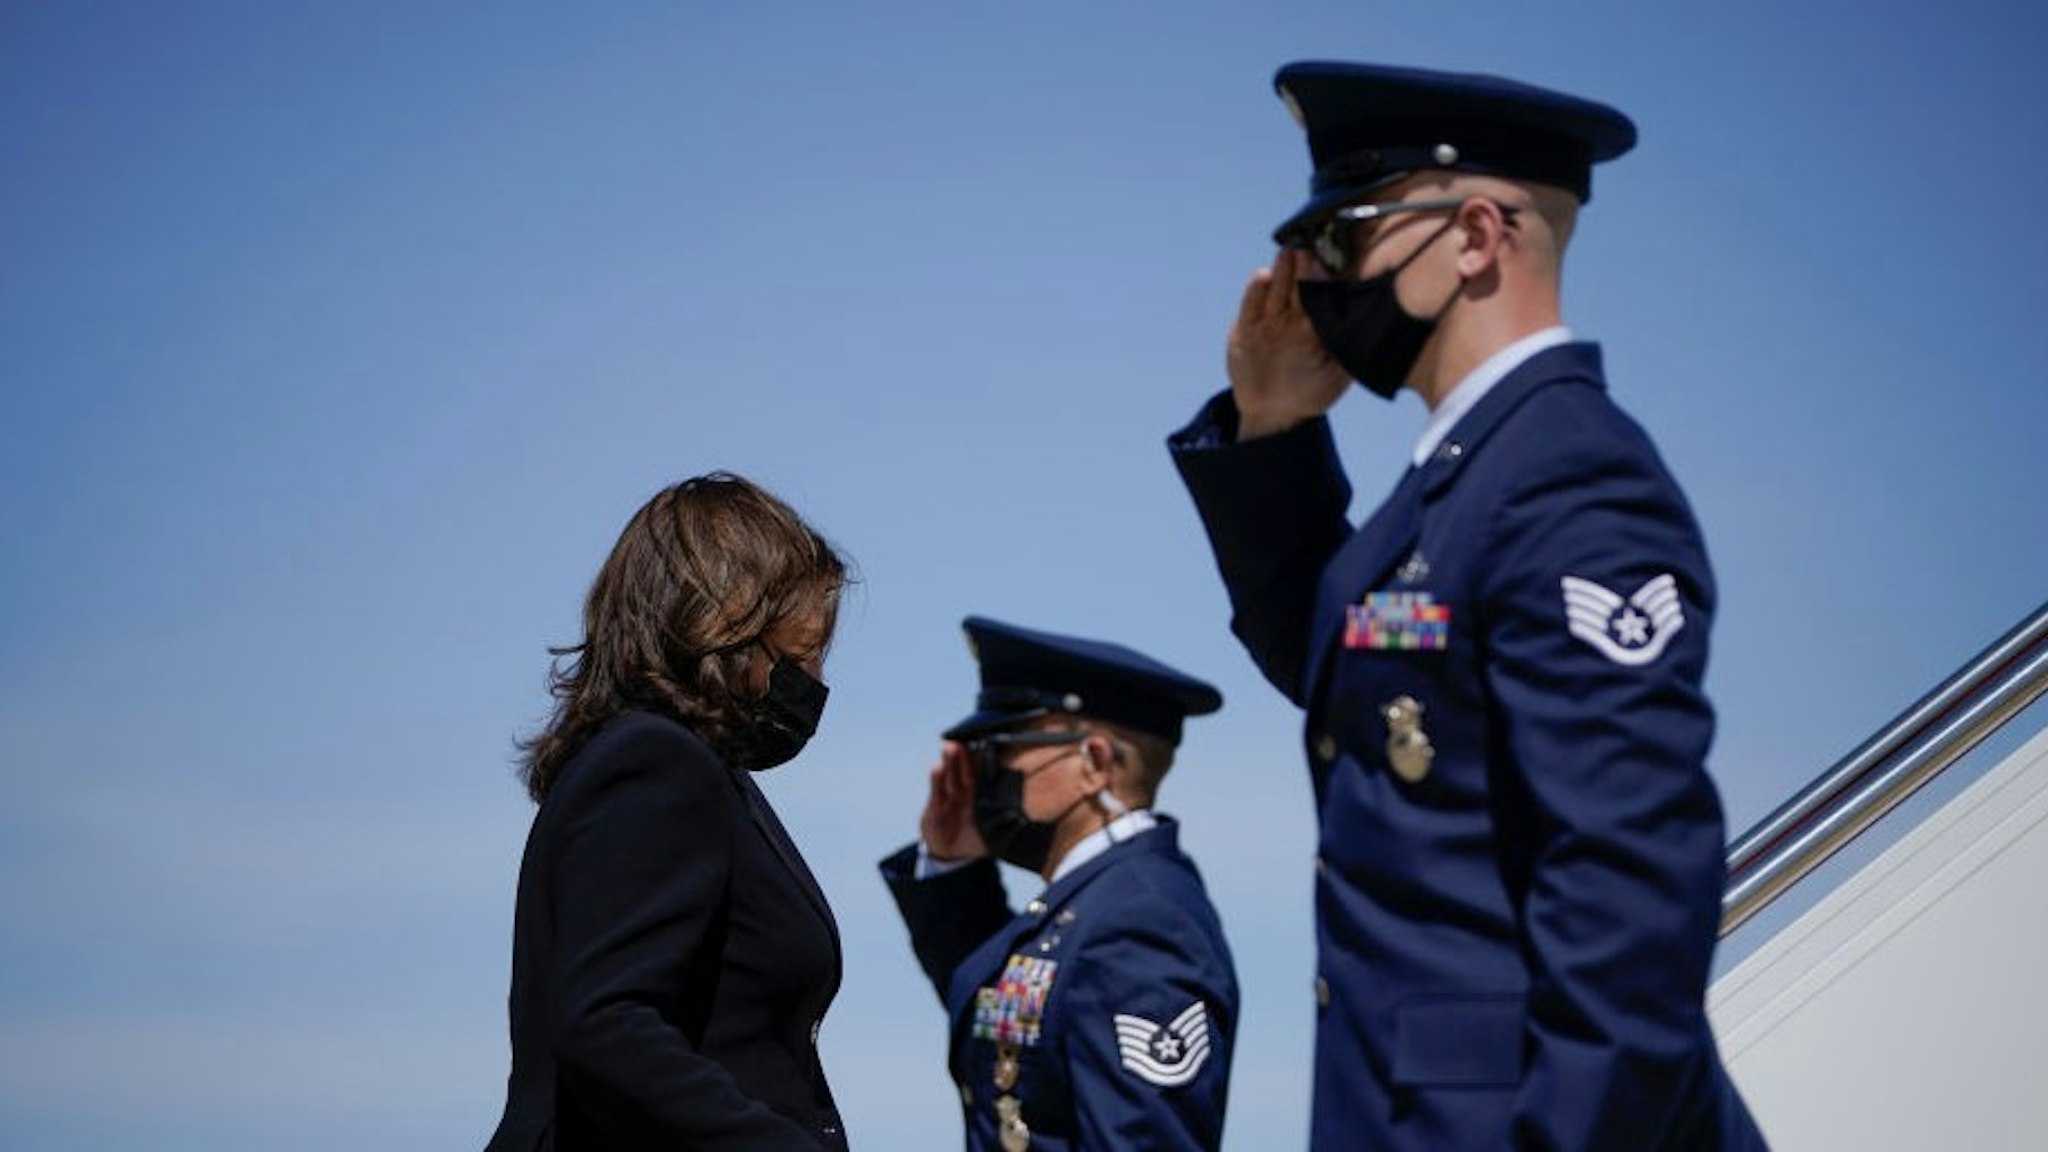 JOINT BASE ANDREWS, MD - MARCH 26: U.S. Vice President Kamala Harris boards Air Force Two at Joint Base Andrews on March 26, 2021 in Joint Base Andrews, Maryland. Harris is traveling to New Haven, Connecticut to promote the Biden administration's recently passed $1.9 billion federal stimulus package. (Photo by